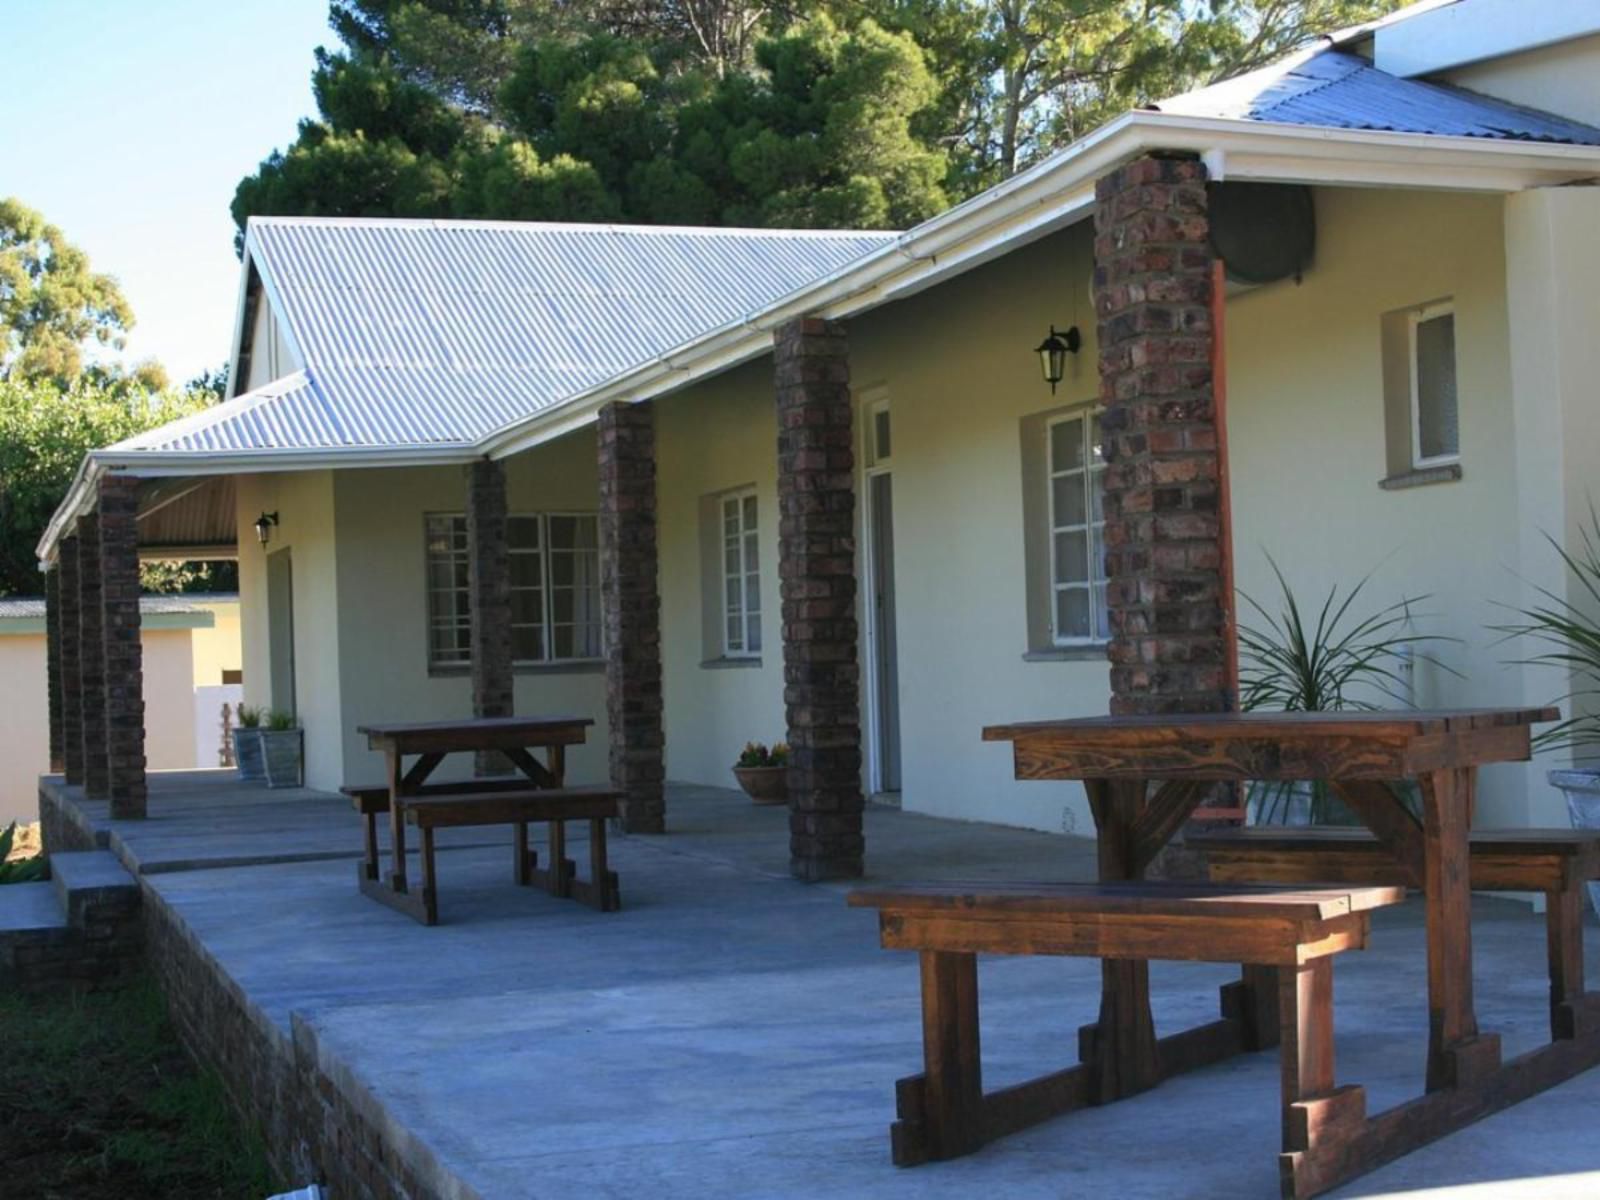 Welvanpas Guest House Middelburg Eastern Cape Eastern Cape South Africa House, Building, Architecture